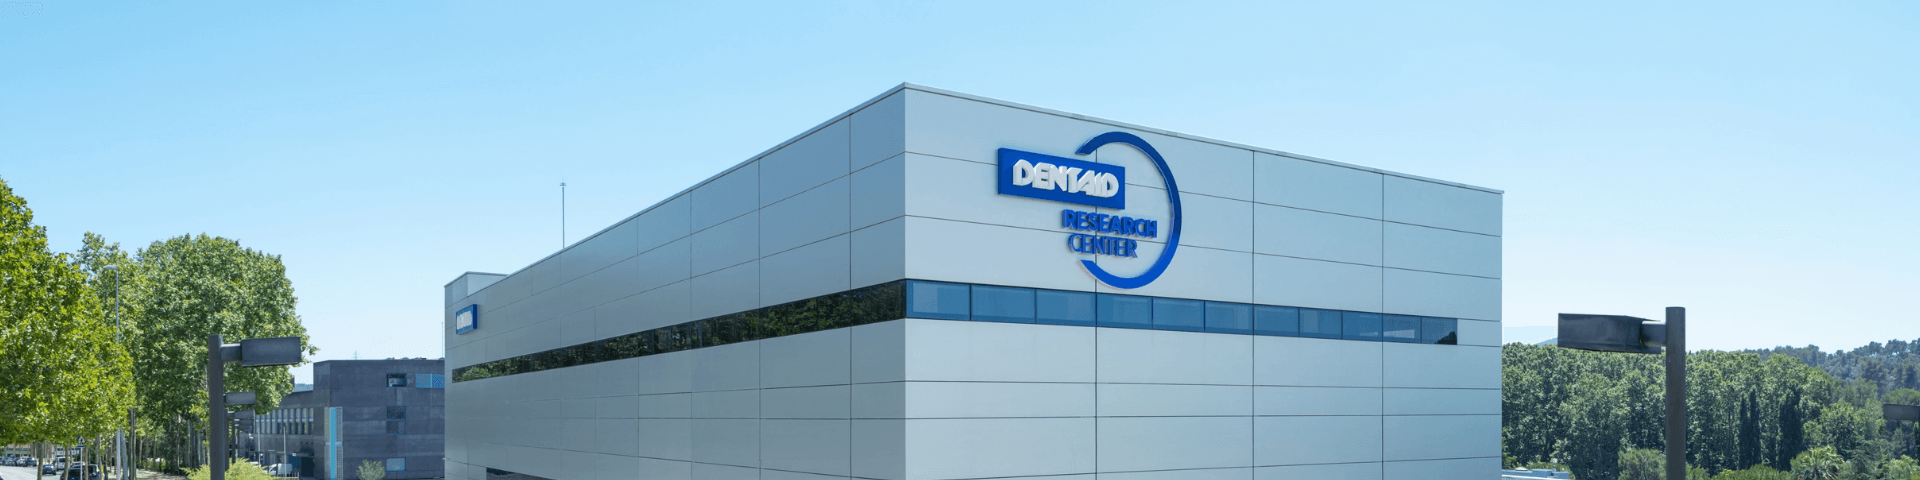 Dentaid Research Center